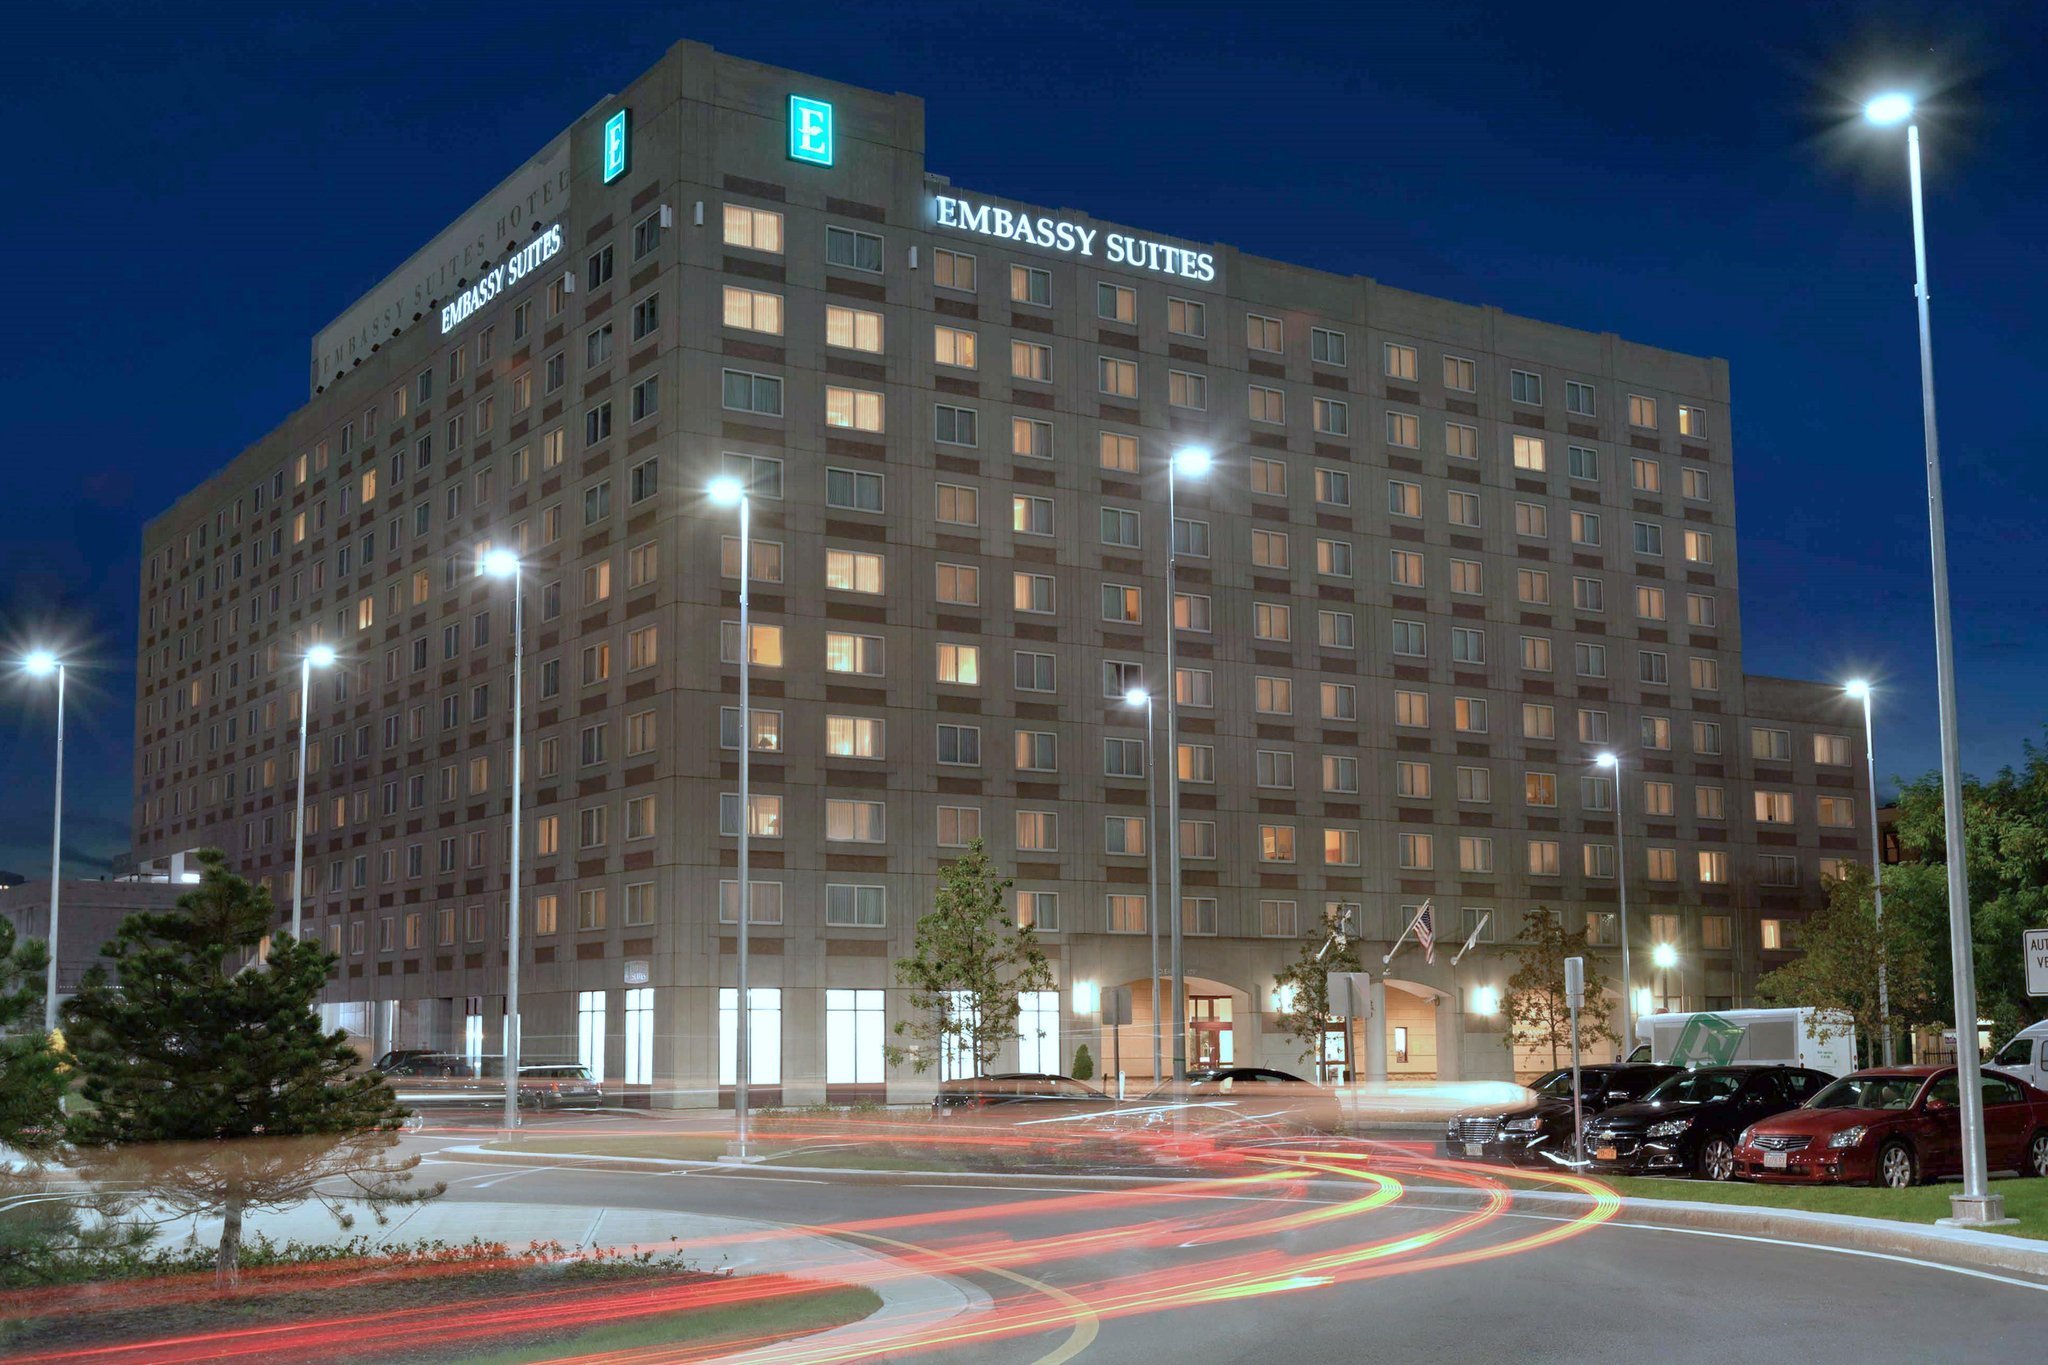 Photo of Embassy Suites by Hilton Boston at Logan Airport, Boston, MA